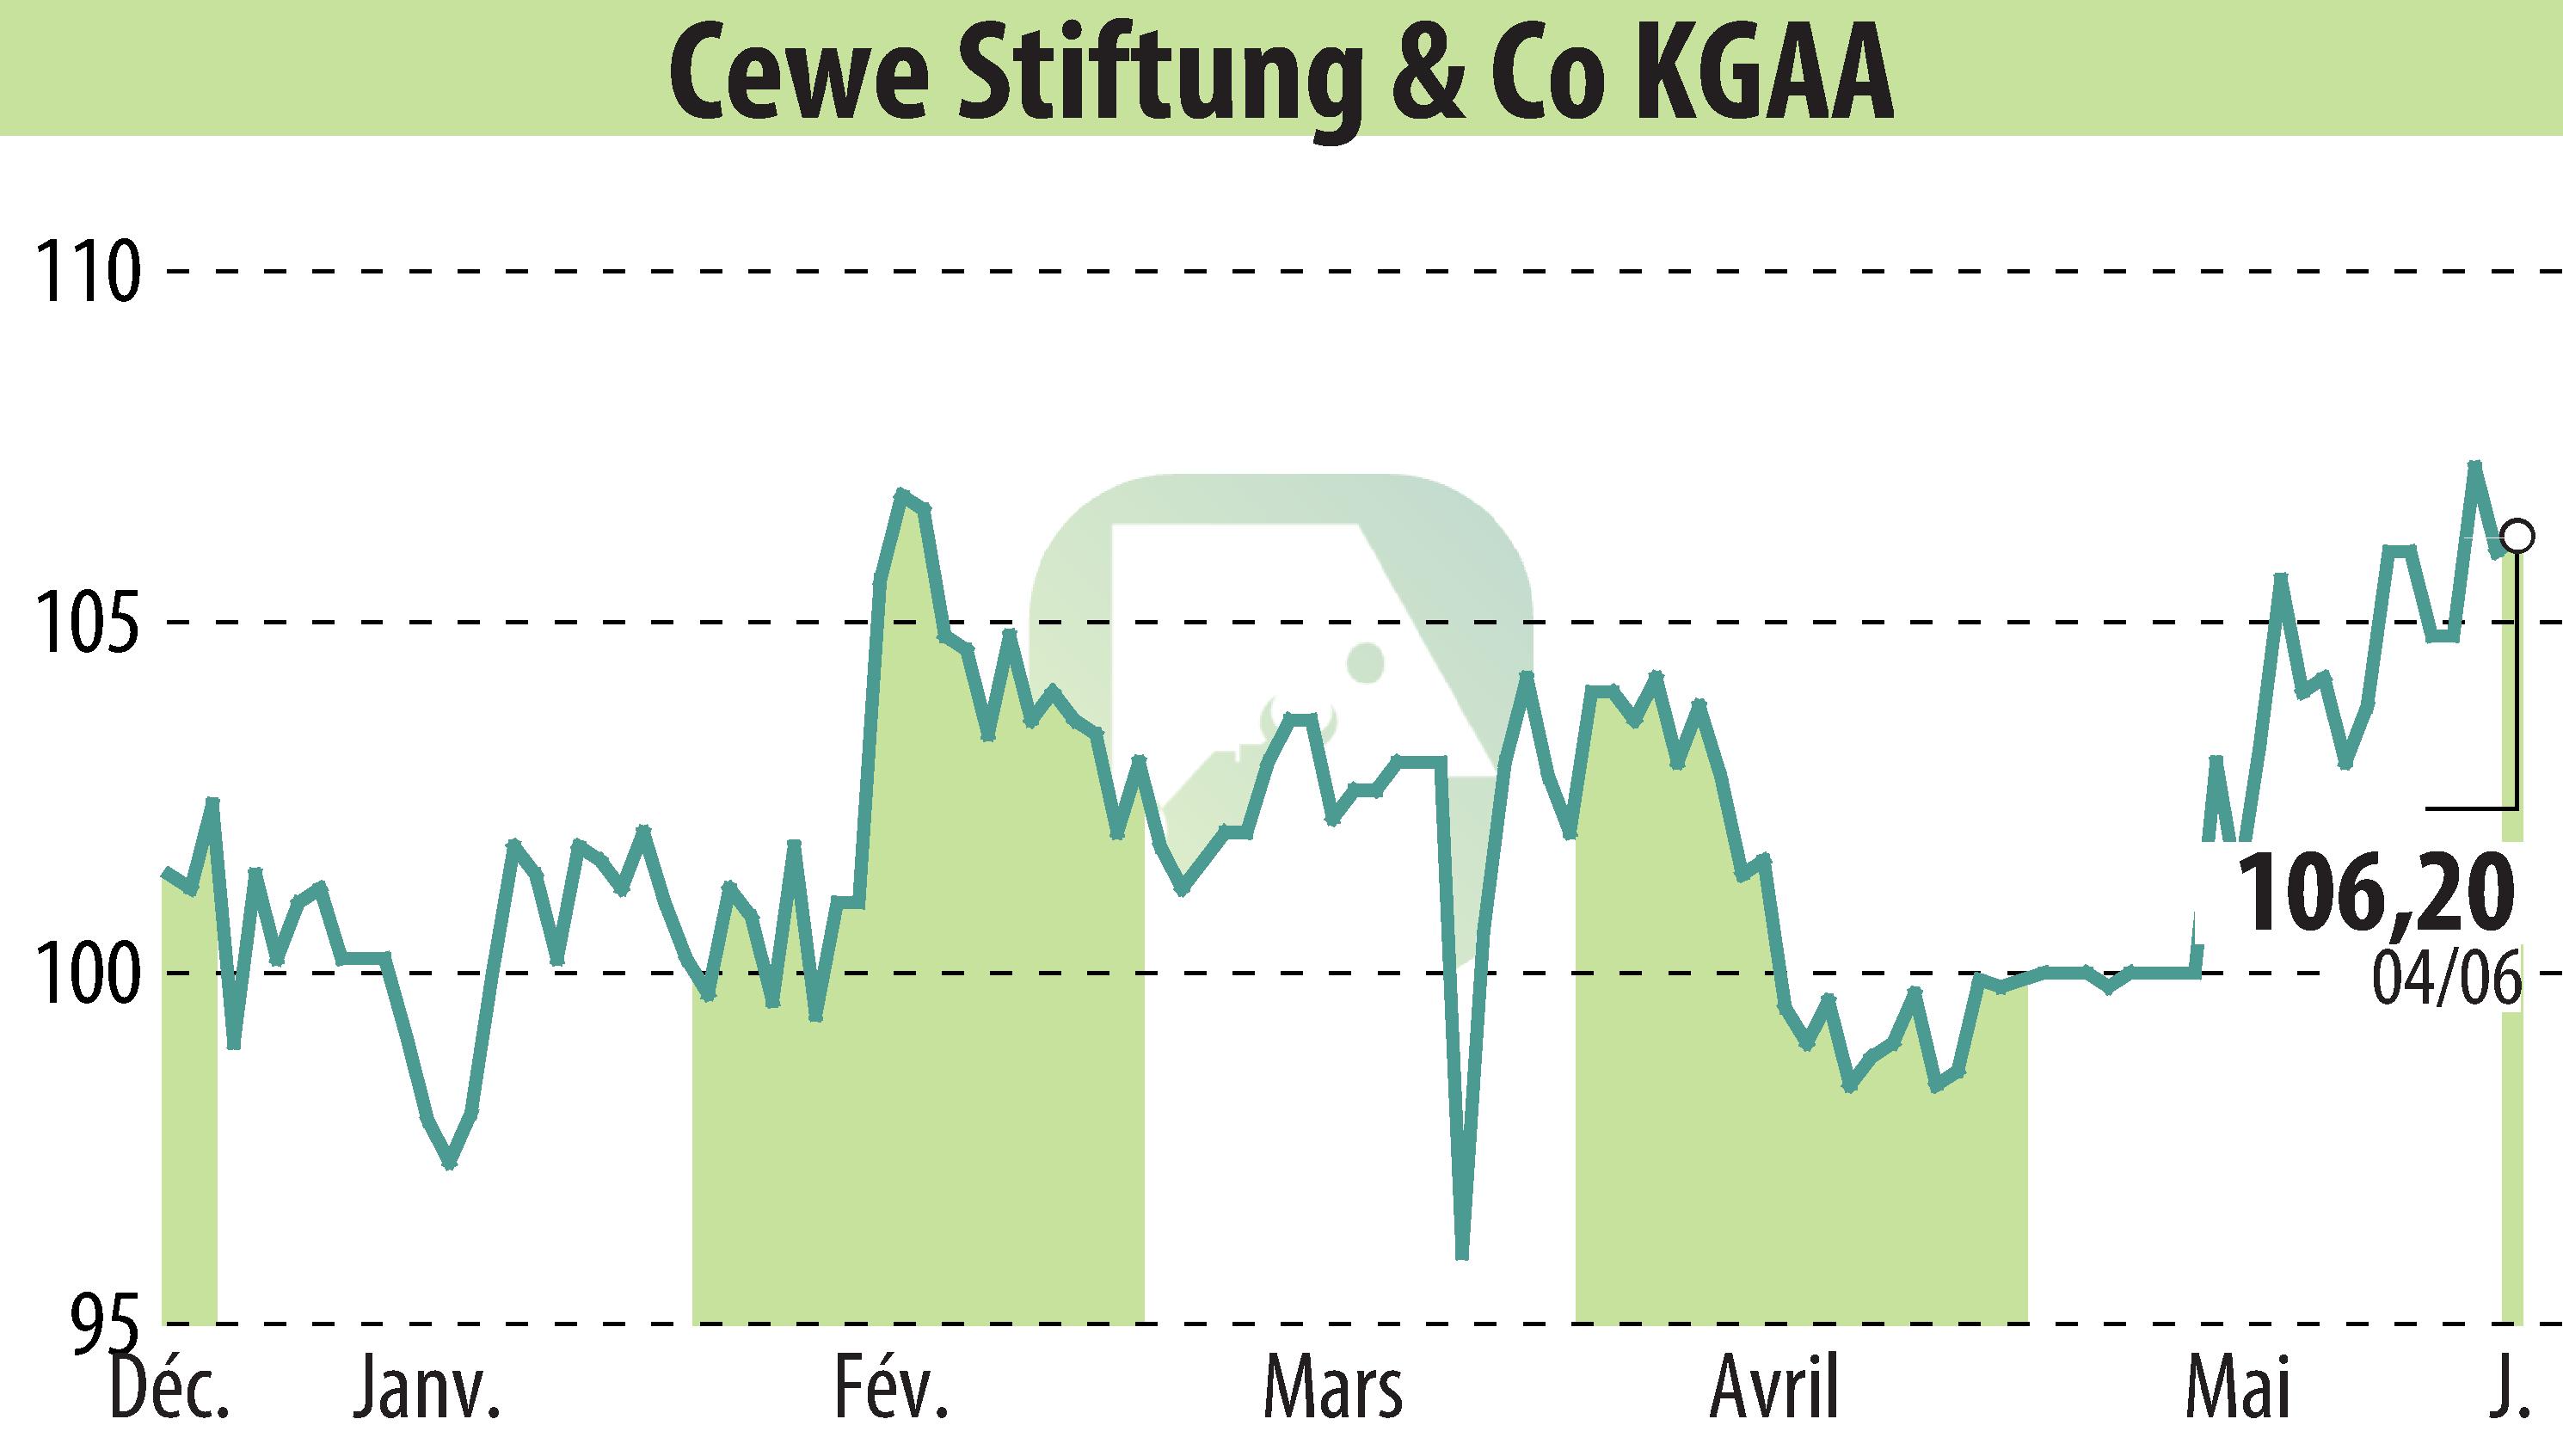 Stock price chart of CEWE Stiftung & Co. KGaA (EBR:CWC) showing fluctuations.